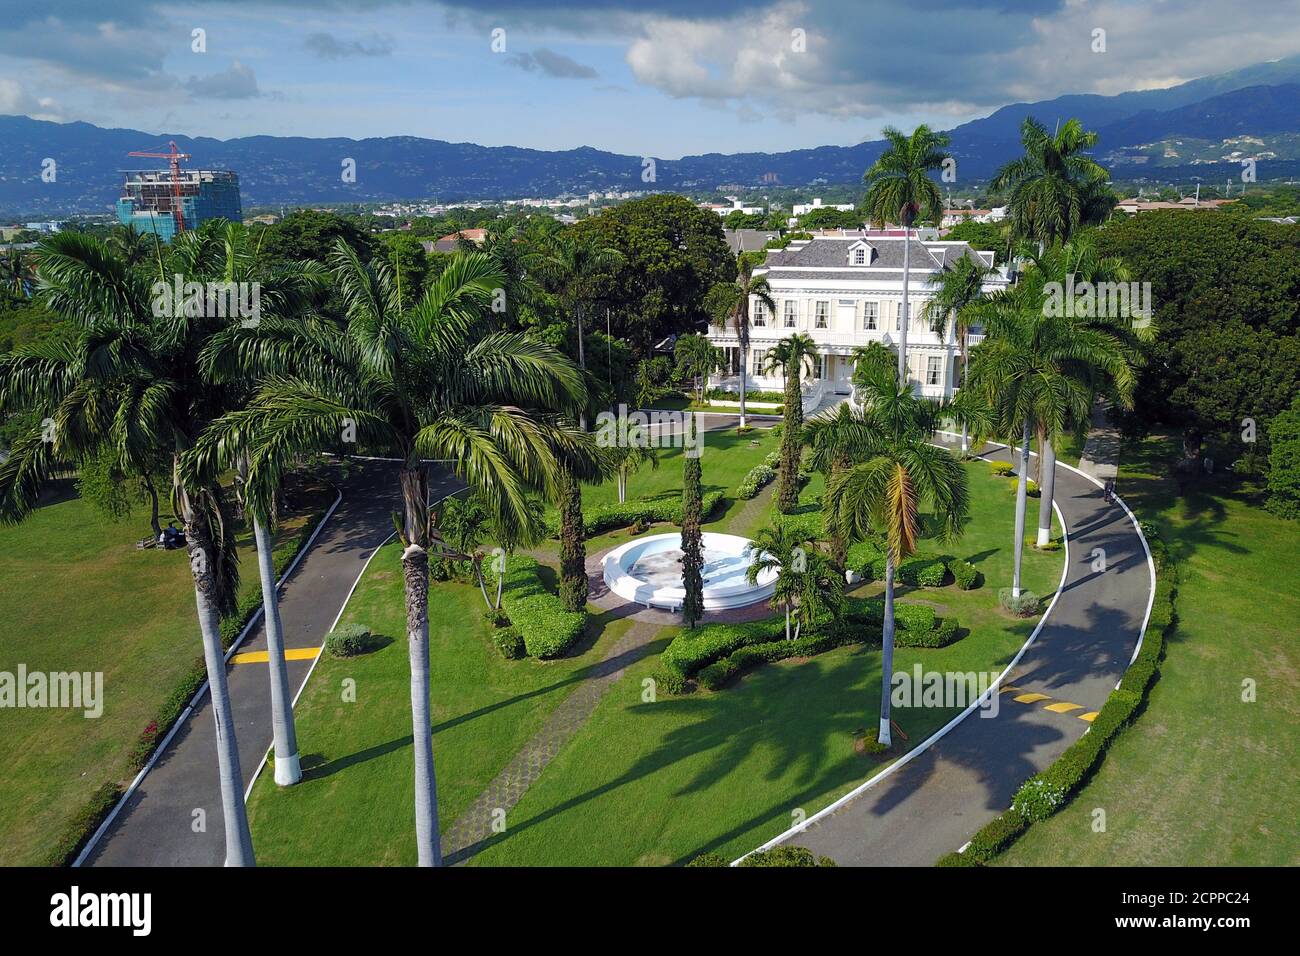 Devon House in Kingston Jamaica is the former residence of George Stiebel, dating to 1881. Nowdays is a museum, opening its gardens for public and fam Stock Photo